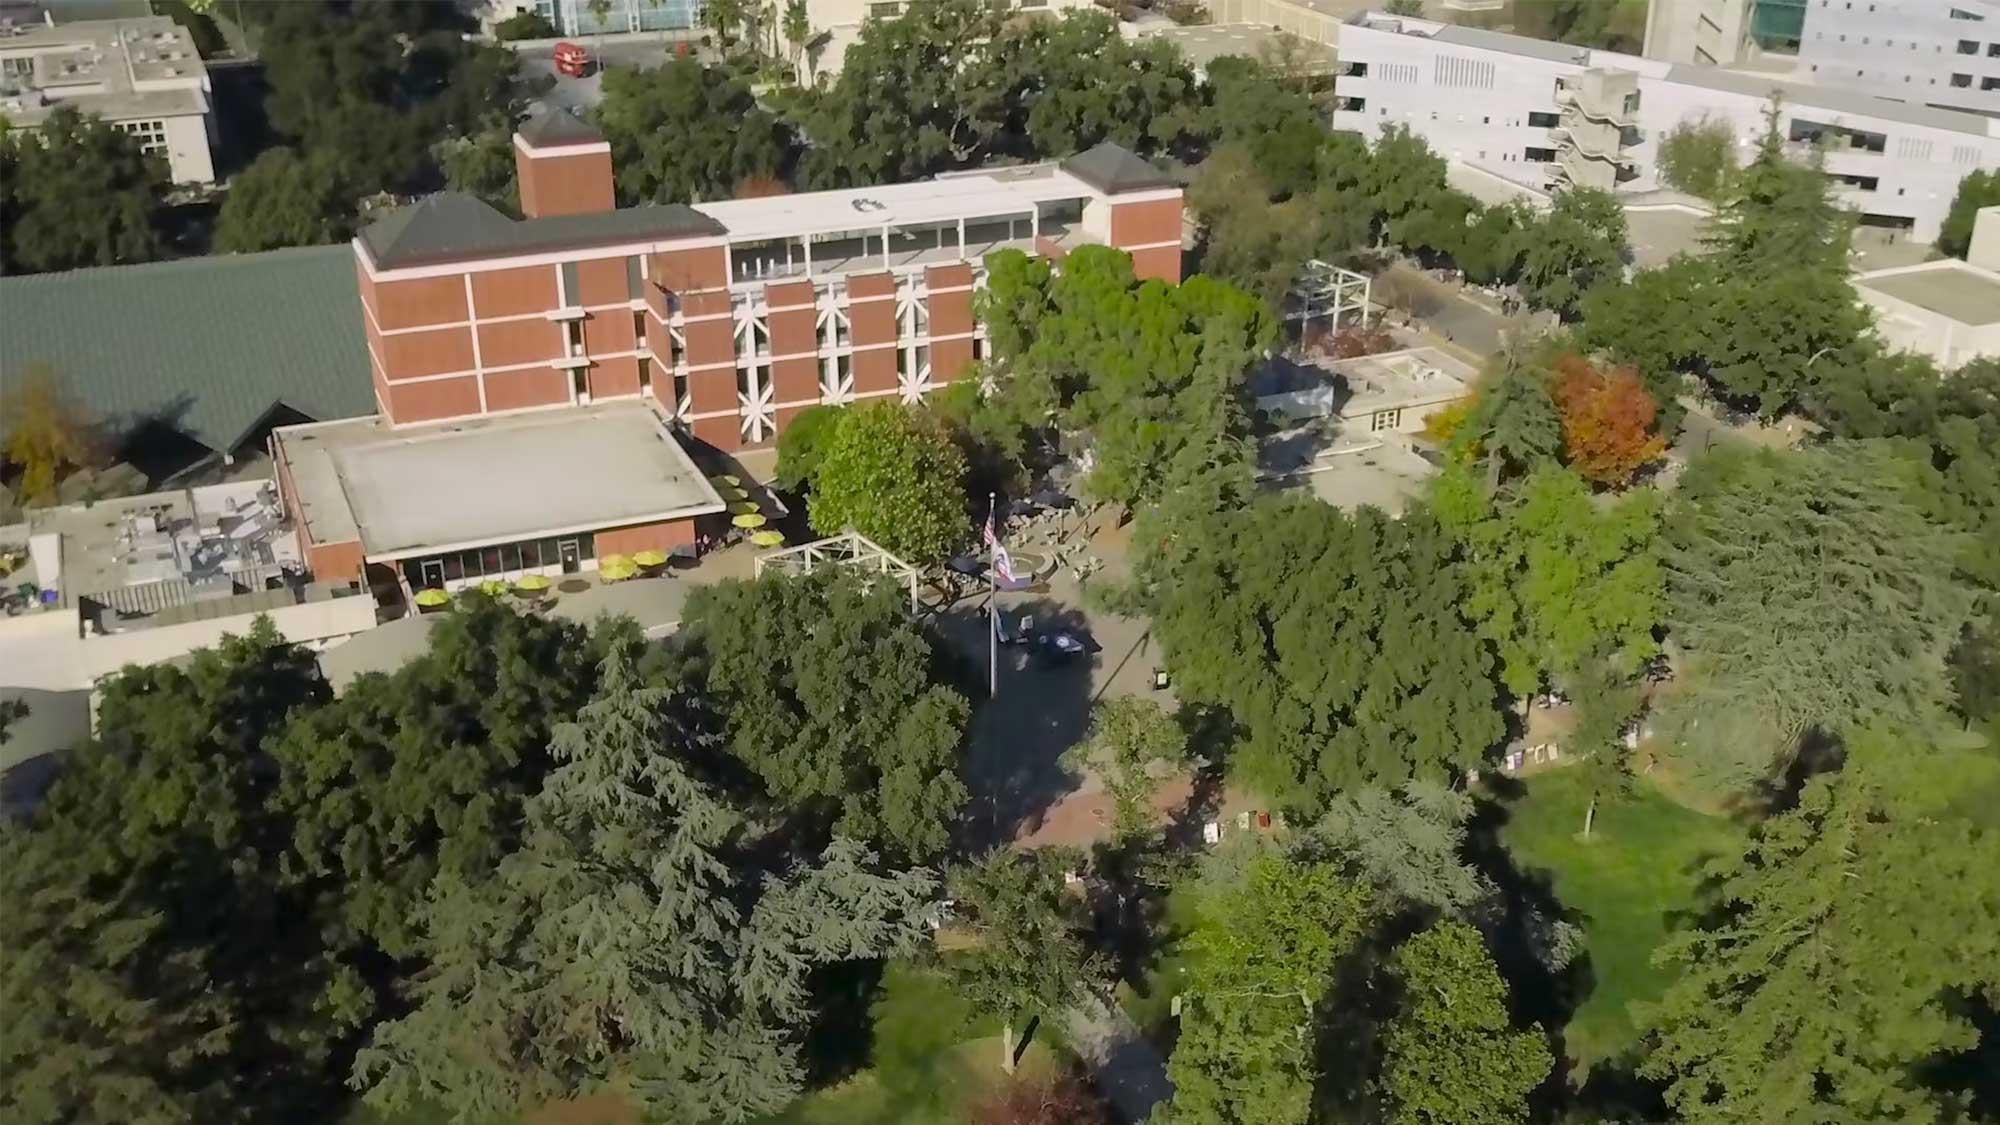 aerial view of the ֱ campus showing some buildings surrounded by trees